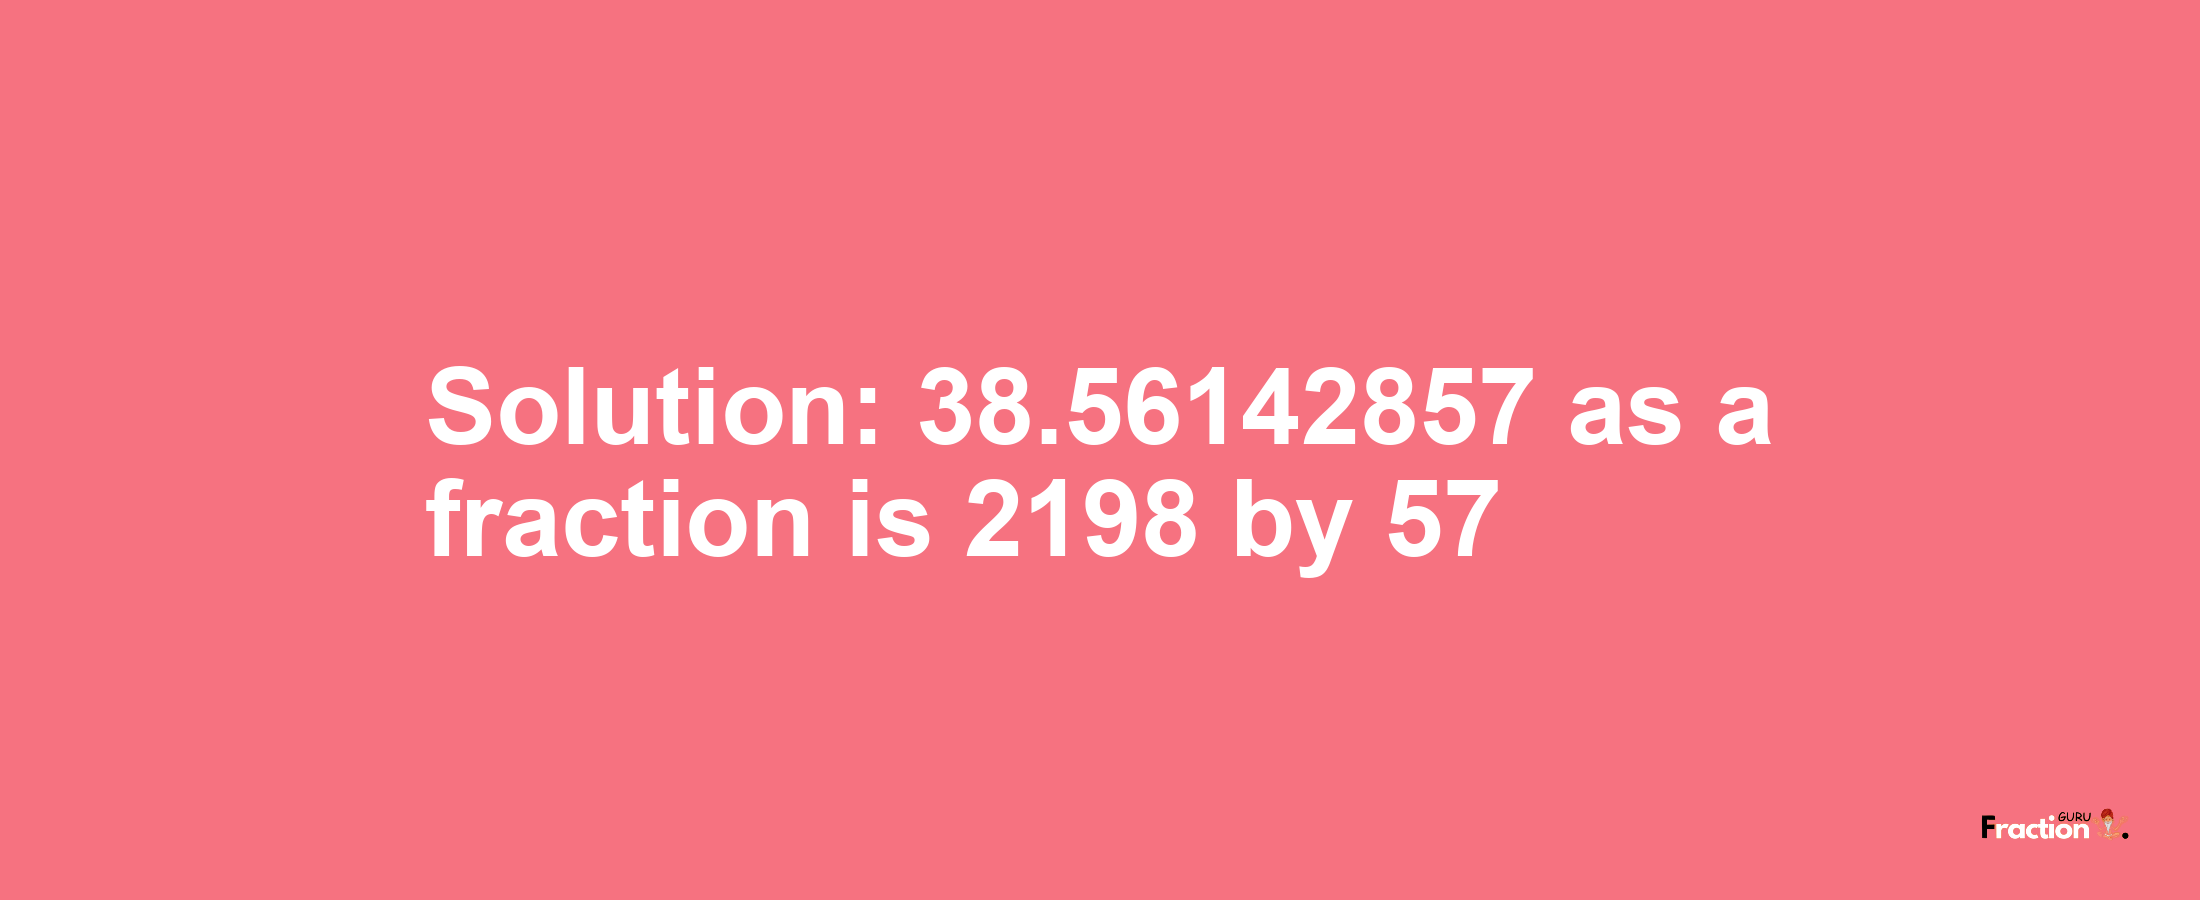 Solution:38.56142857 as a fraction is 2198/57